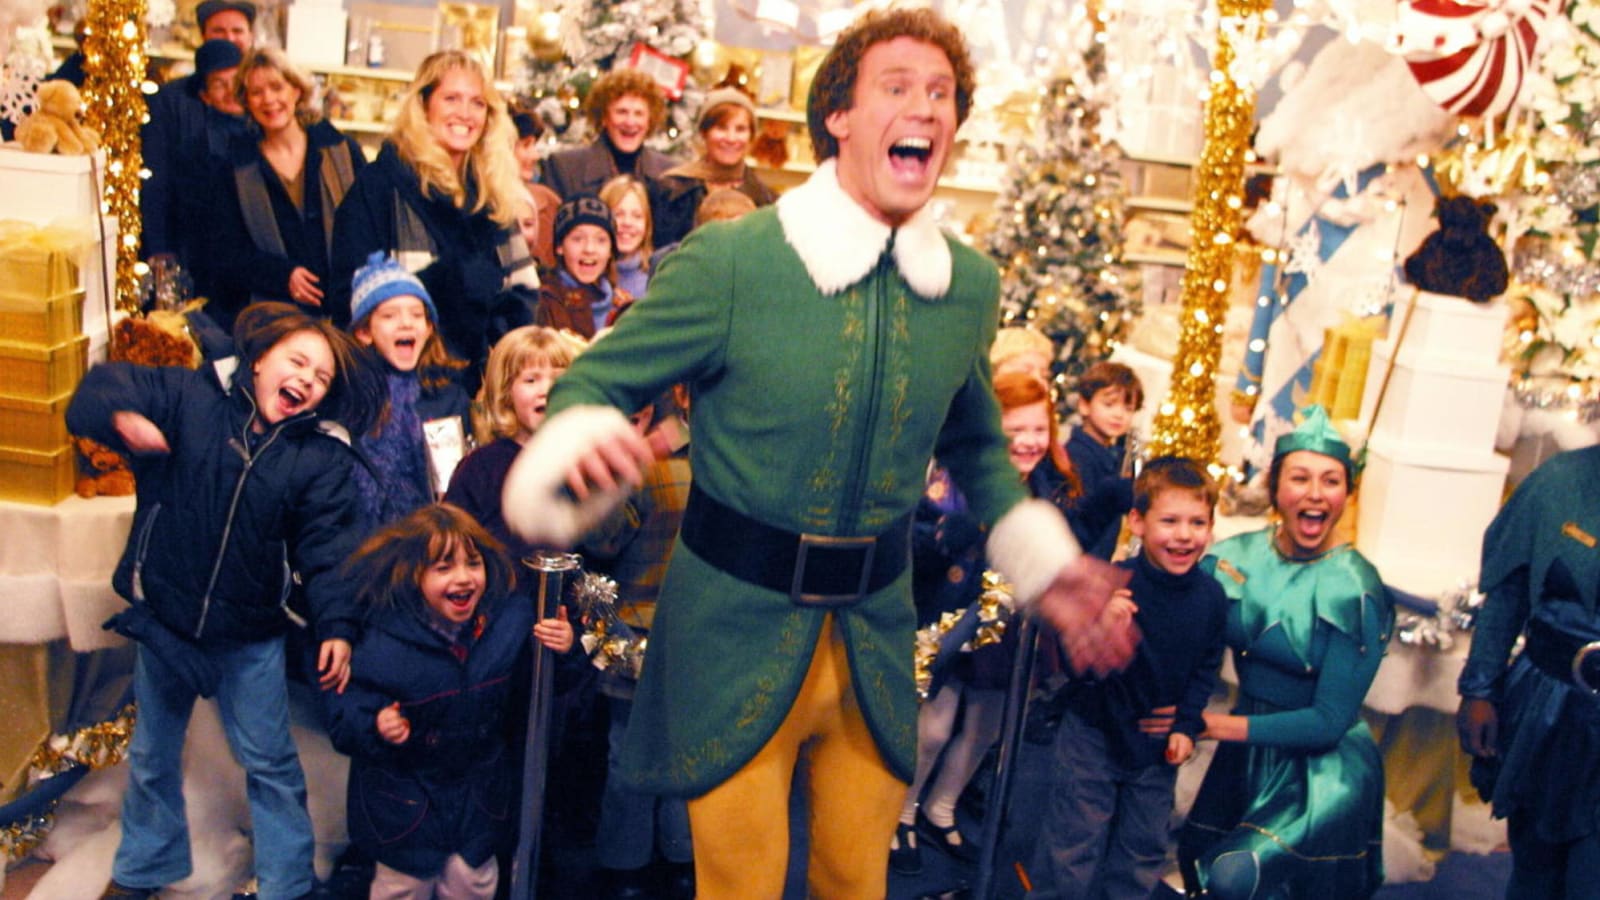 Yule laugh, yule cry: The 25 best Christmas movies